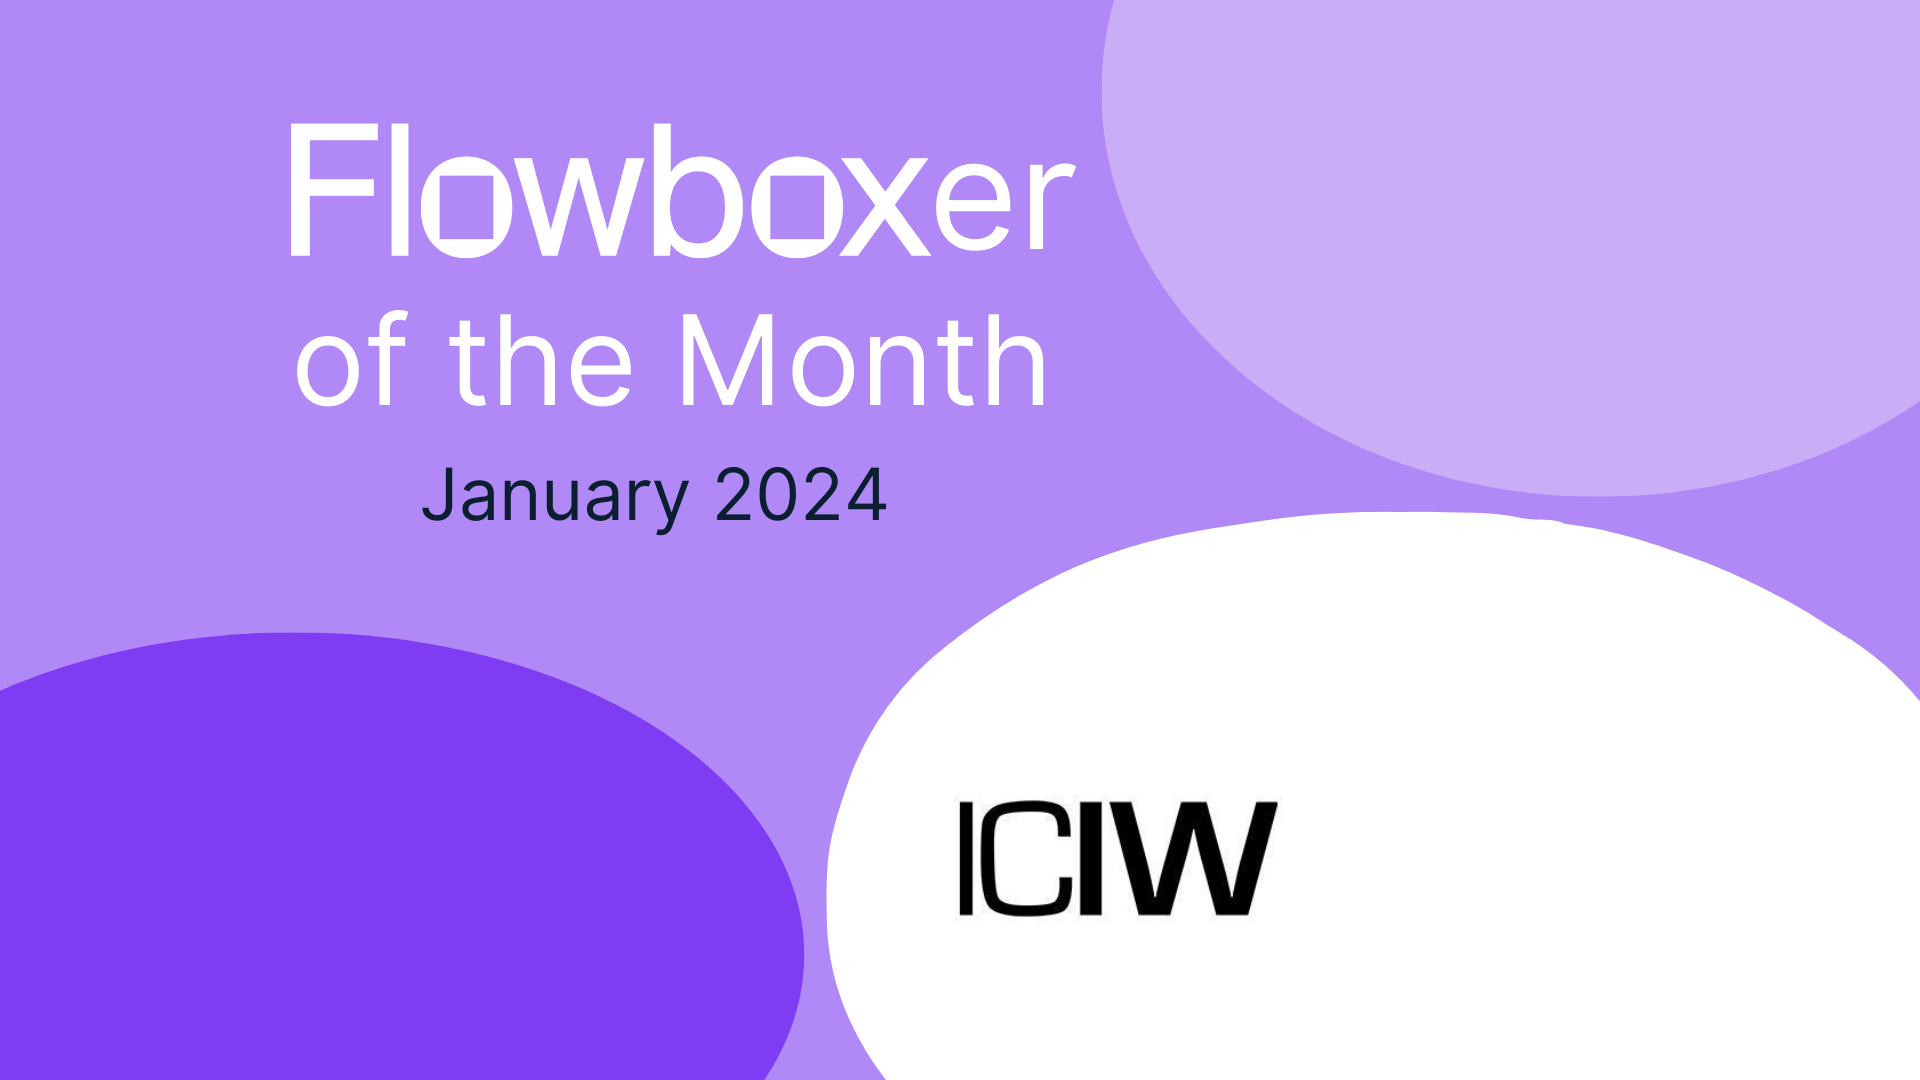 Flowboxer of the Month — January 2024: ICIW